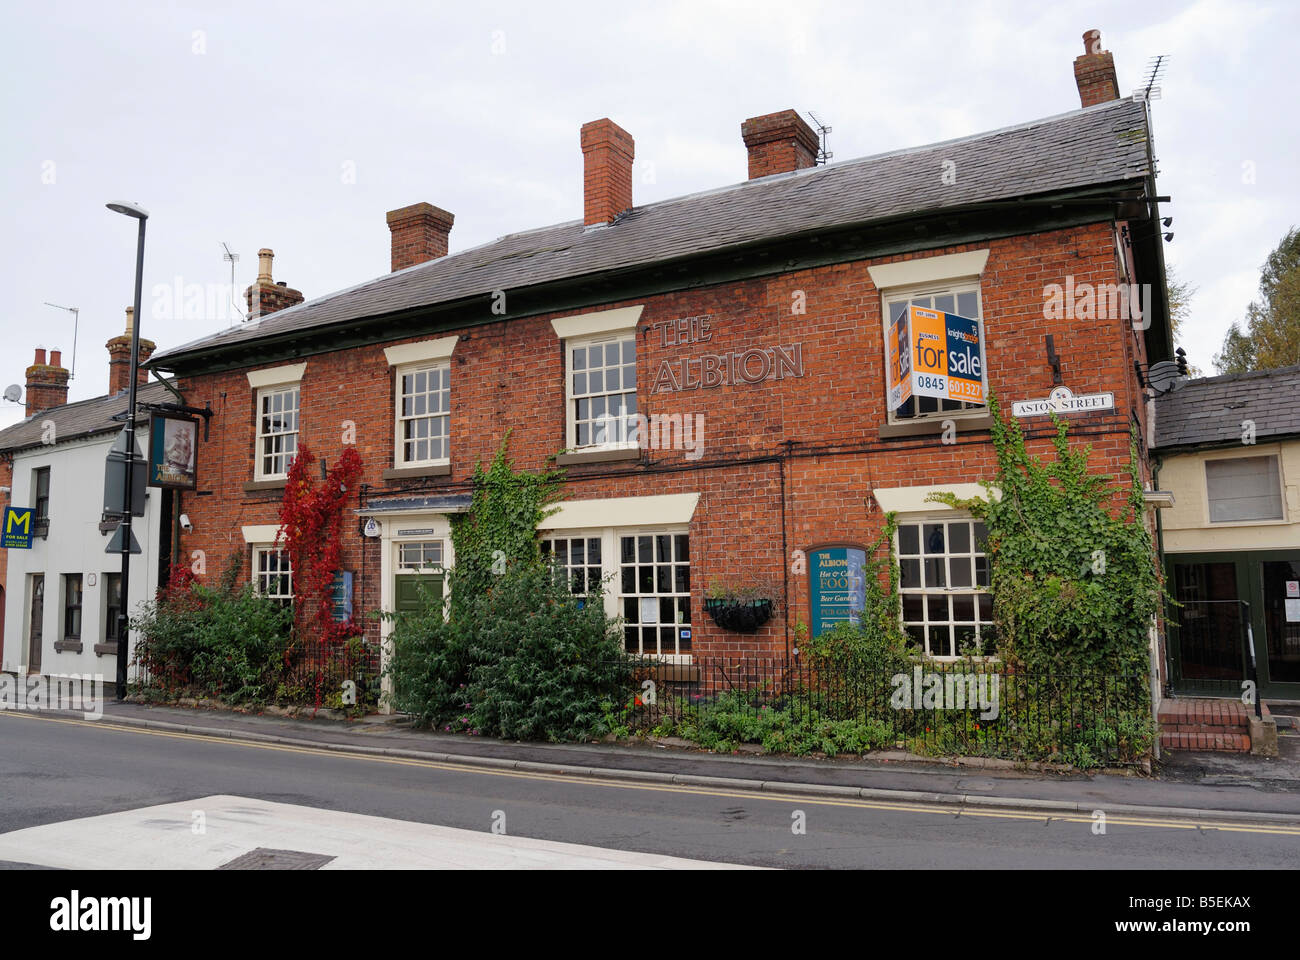 The Albion public house in Wem Shropshire closed. See image AY08DG Stock Photo